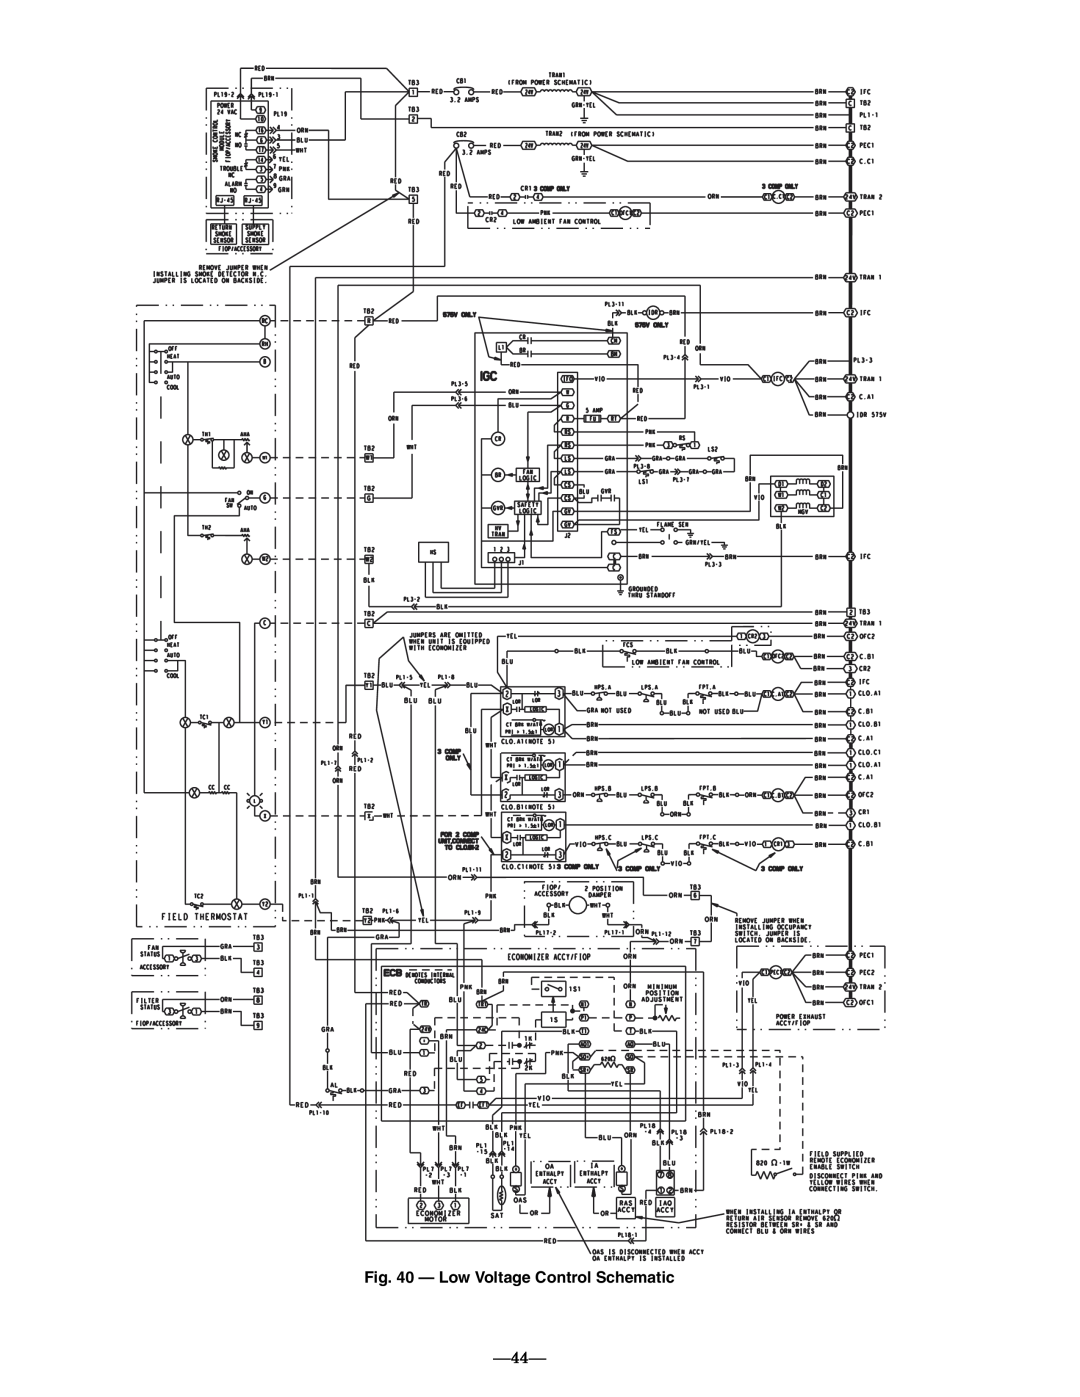 Bryant 581A operation manual Low Voltage Control Schematic 